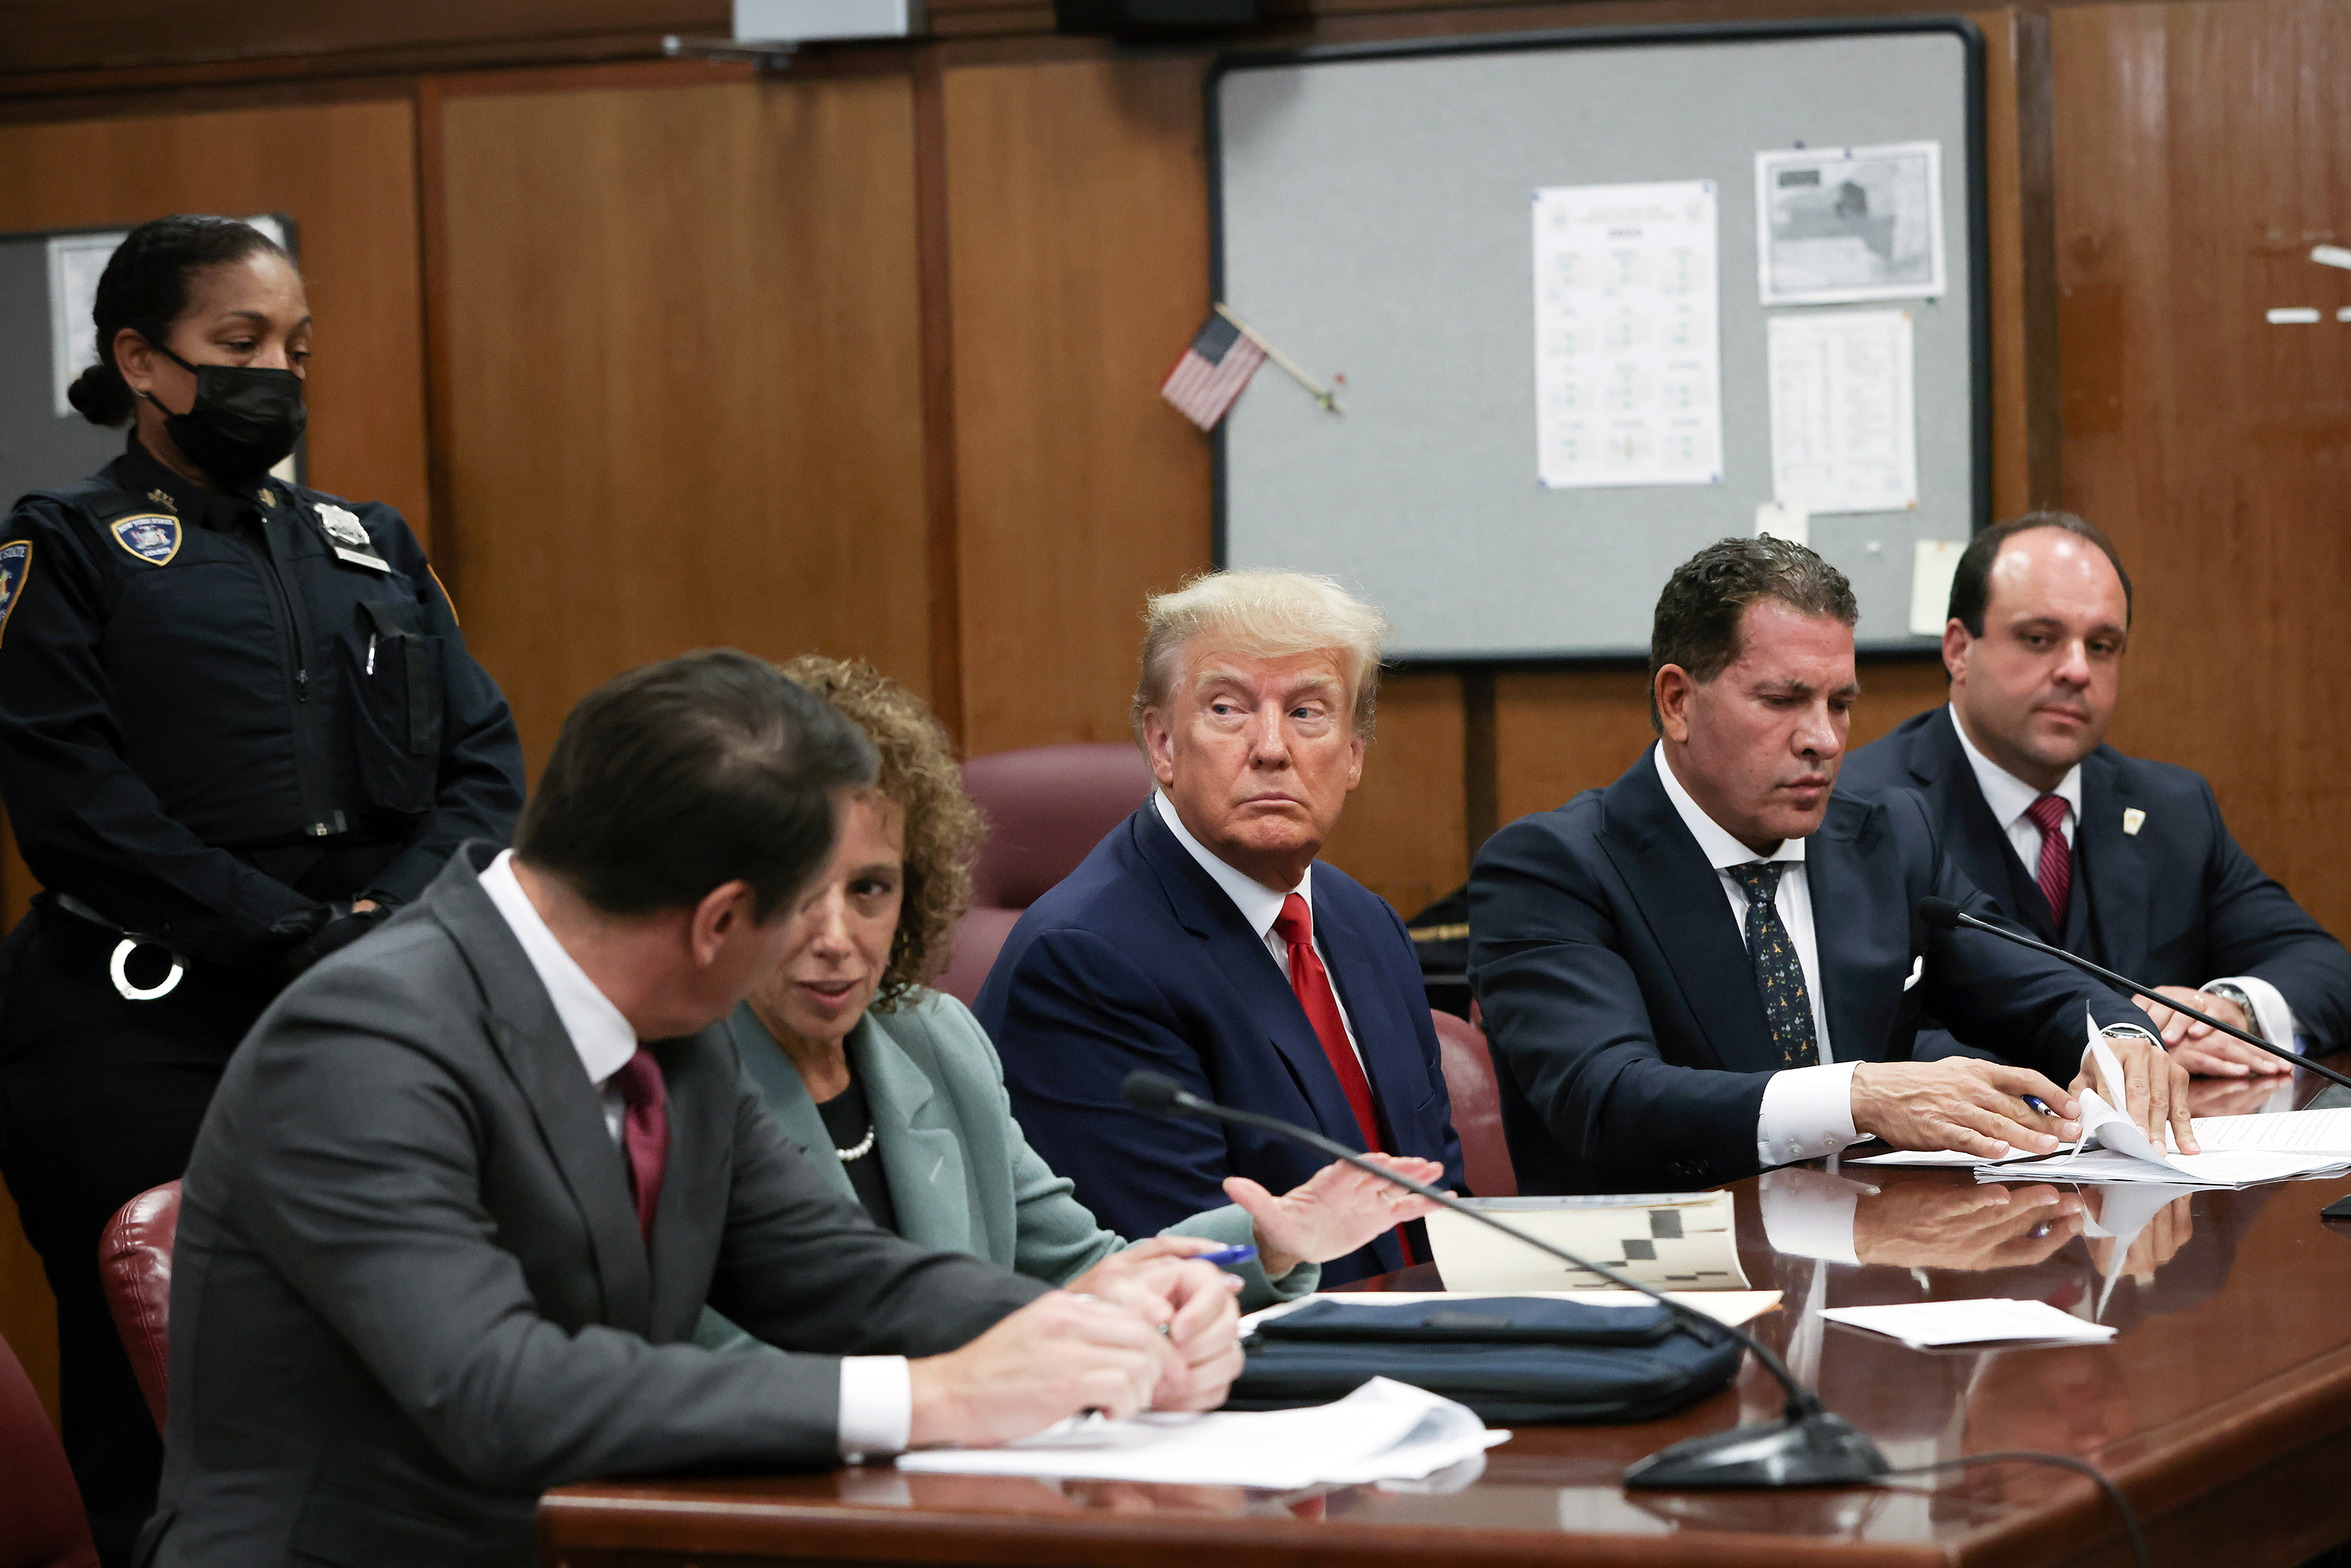 Former President Donald Trump sits in the courtroom with his attorneys Todd Blanche, Susan Necheles, Joe Tacopina and Boris Epshteyn during his arraignment at the Manhattan Criminal Court April 4, in New York City.